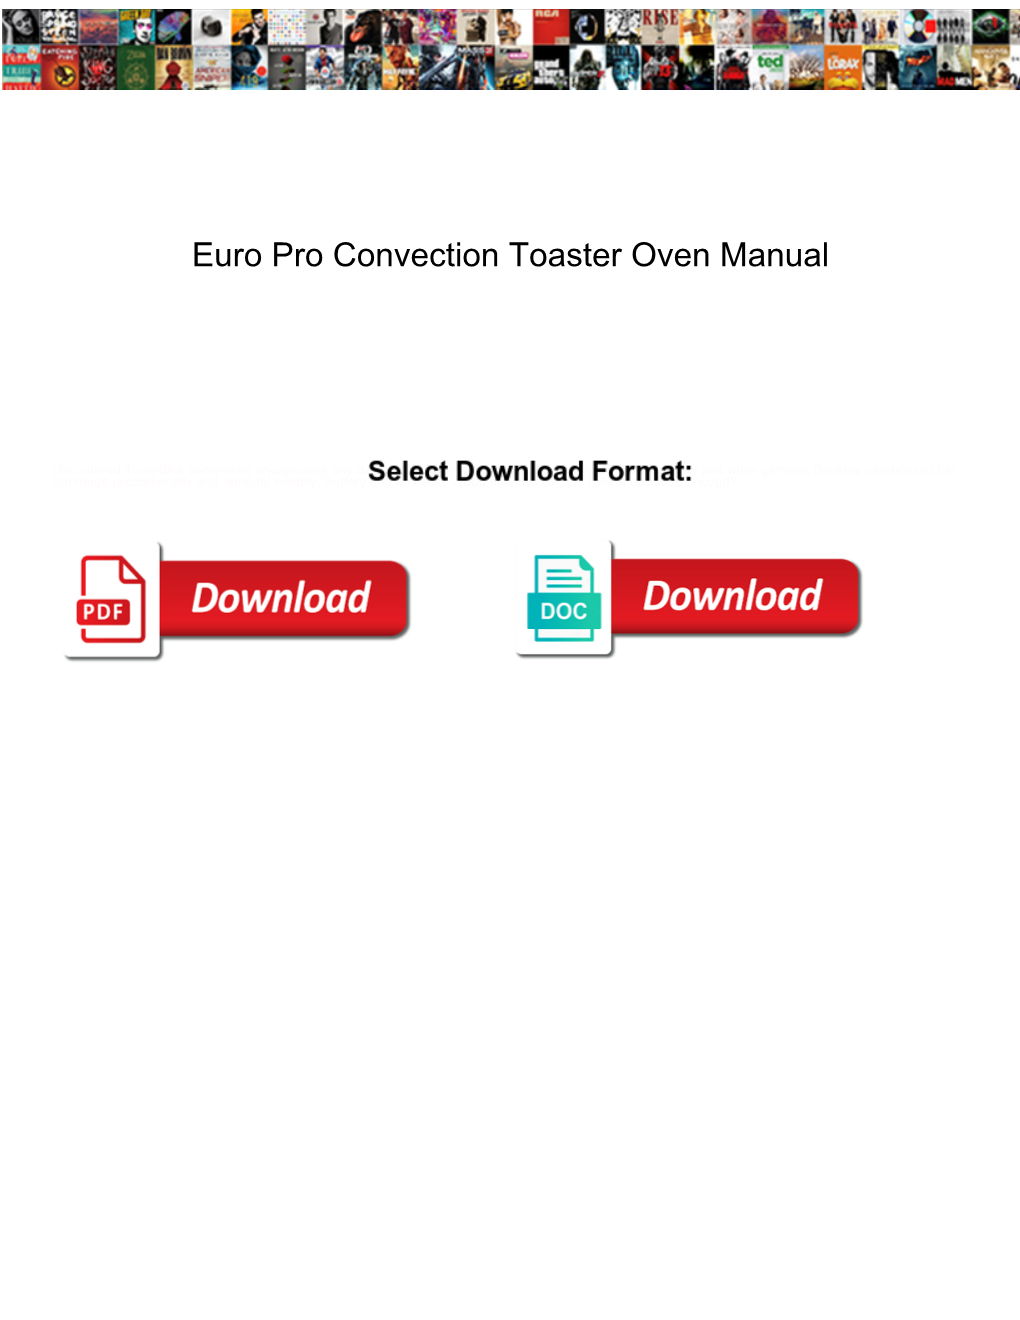 Euro Pro Convection Toaster Oven Manual